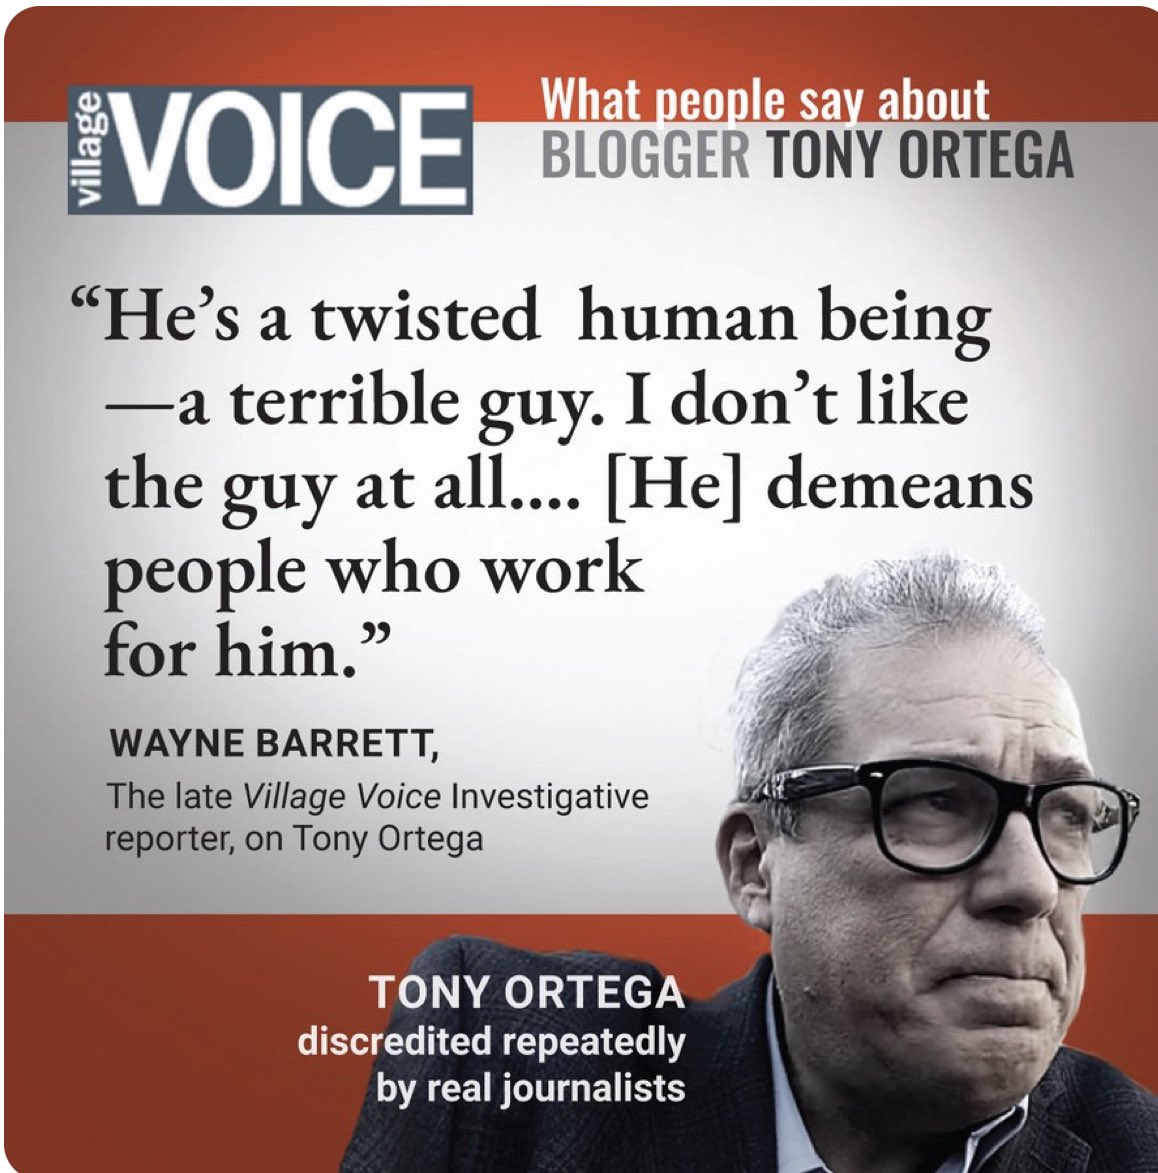 Wayne Barrett worked as an investigative reporter and senior editor for @villagevoice for 37 years. He was a real journalist with a great record. This is what he said about @TonyOrtega94